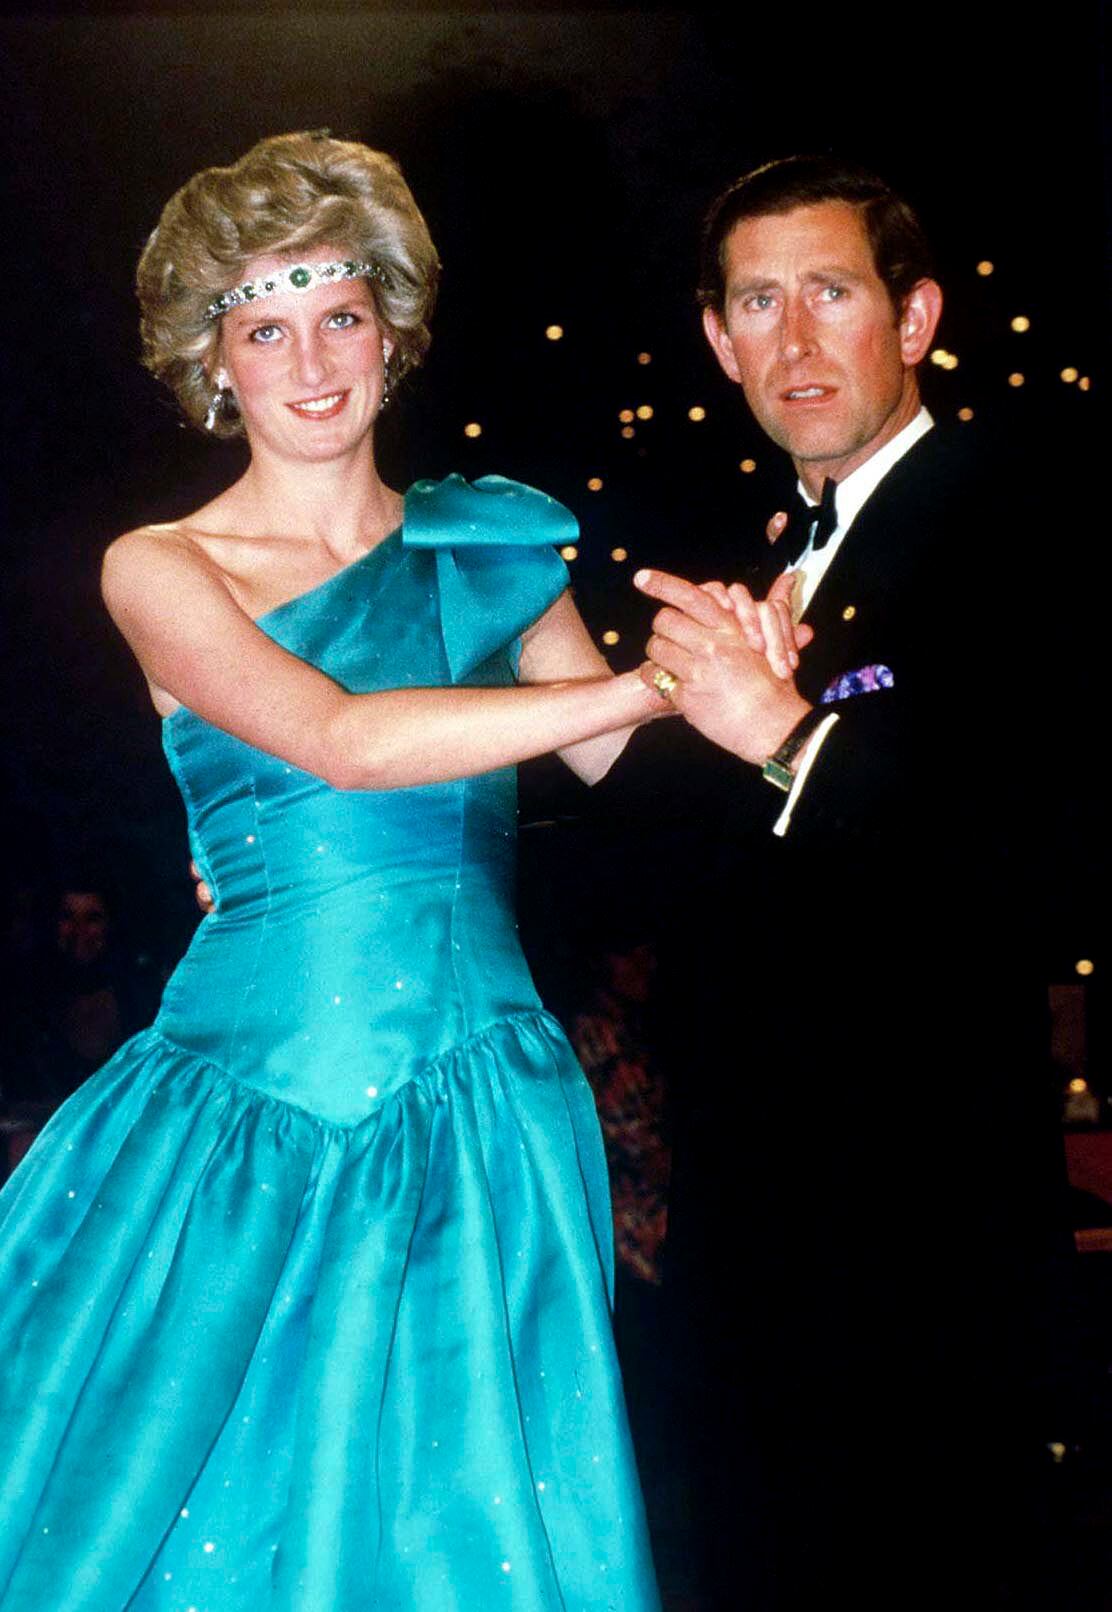 MELBOURNE, AUSTRALIA - OCTOBER 01:  Prince Charles Dancing With His Wife, Princess Diana, In Melbourne, During Their Official Tour Of Australia.  The Princess Is Wearing A Diamond And Emerald Choker (a Wedding Gift From The Queen) As A Headband With A One-shouldered Turquoise Satin Organza Dress Designed By David And Elizabeth Emanuel.  (Photo by Tim Graham Photo Library via Getty Images)